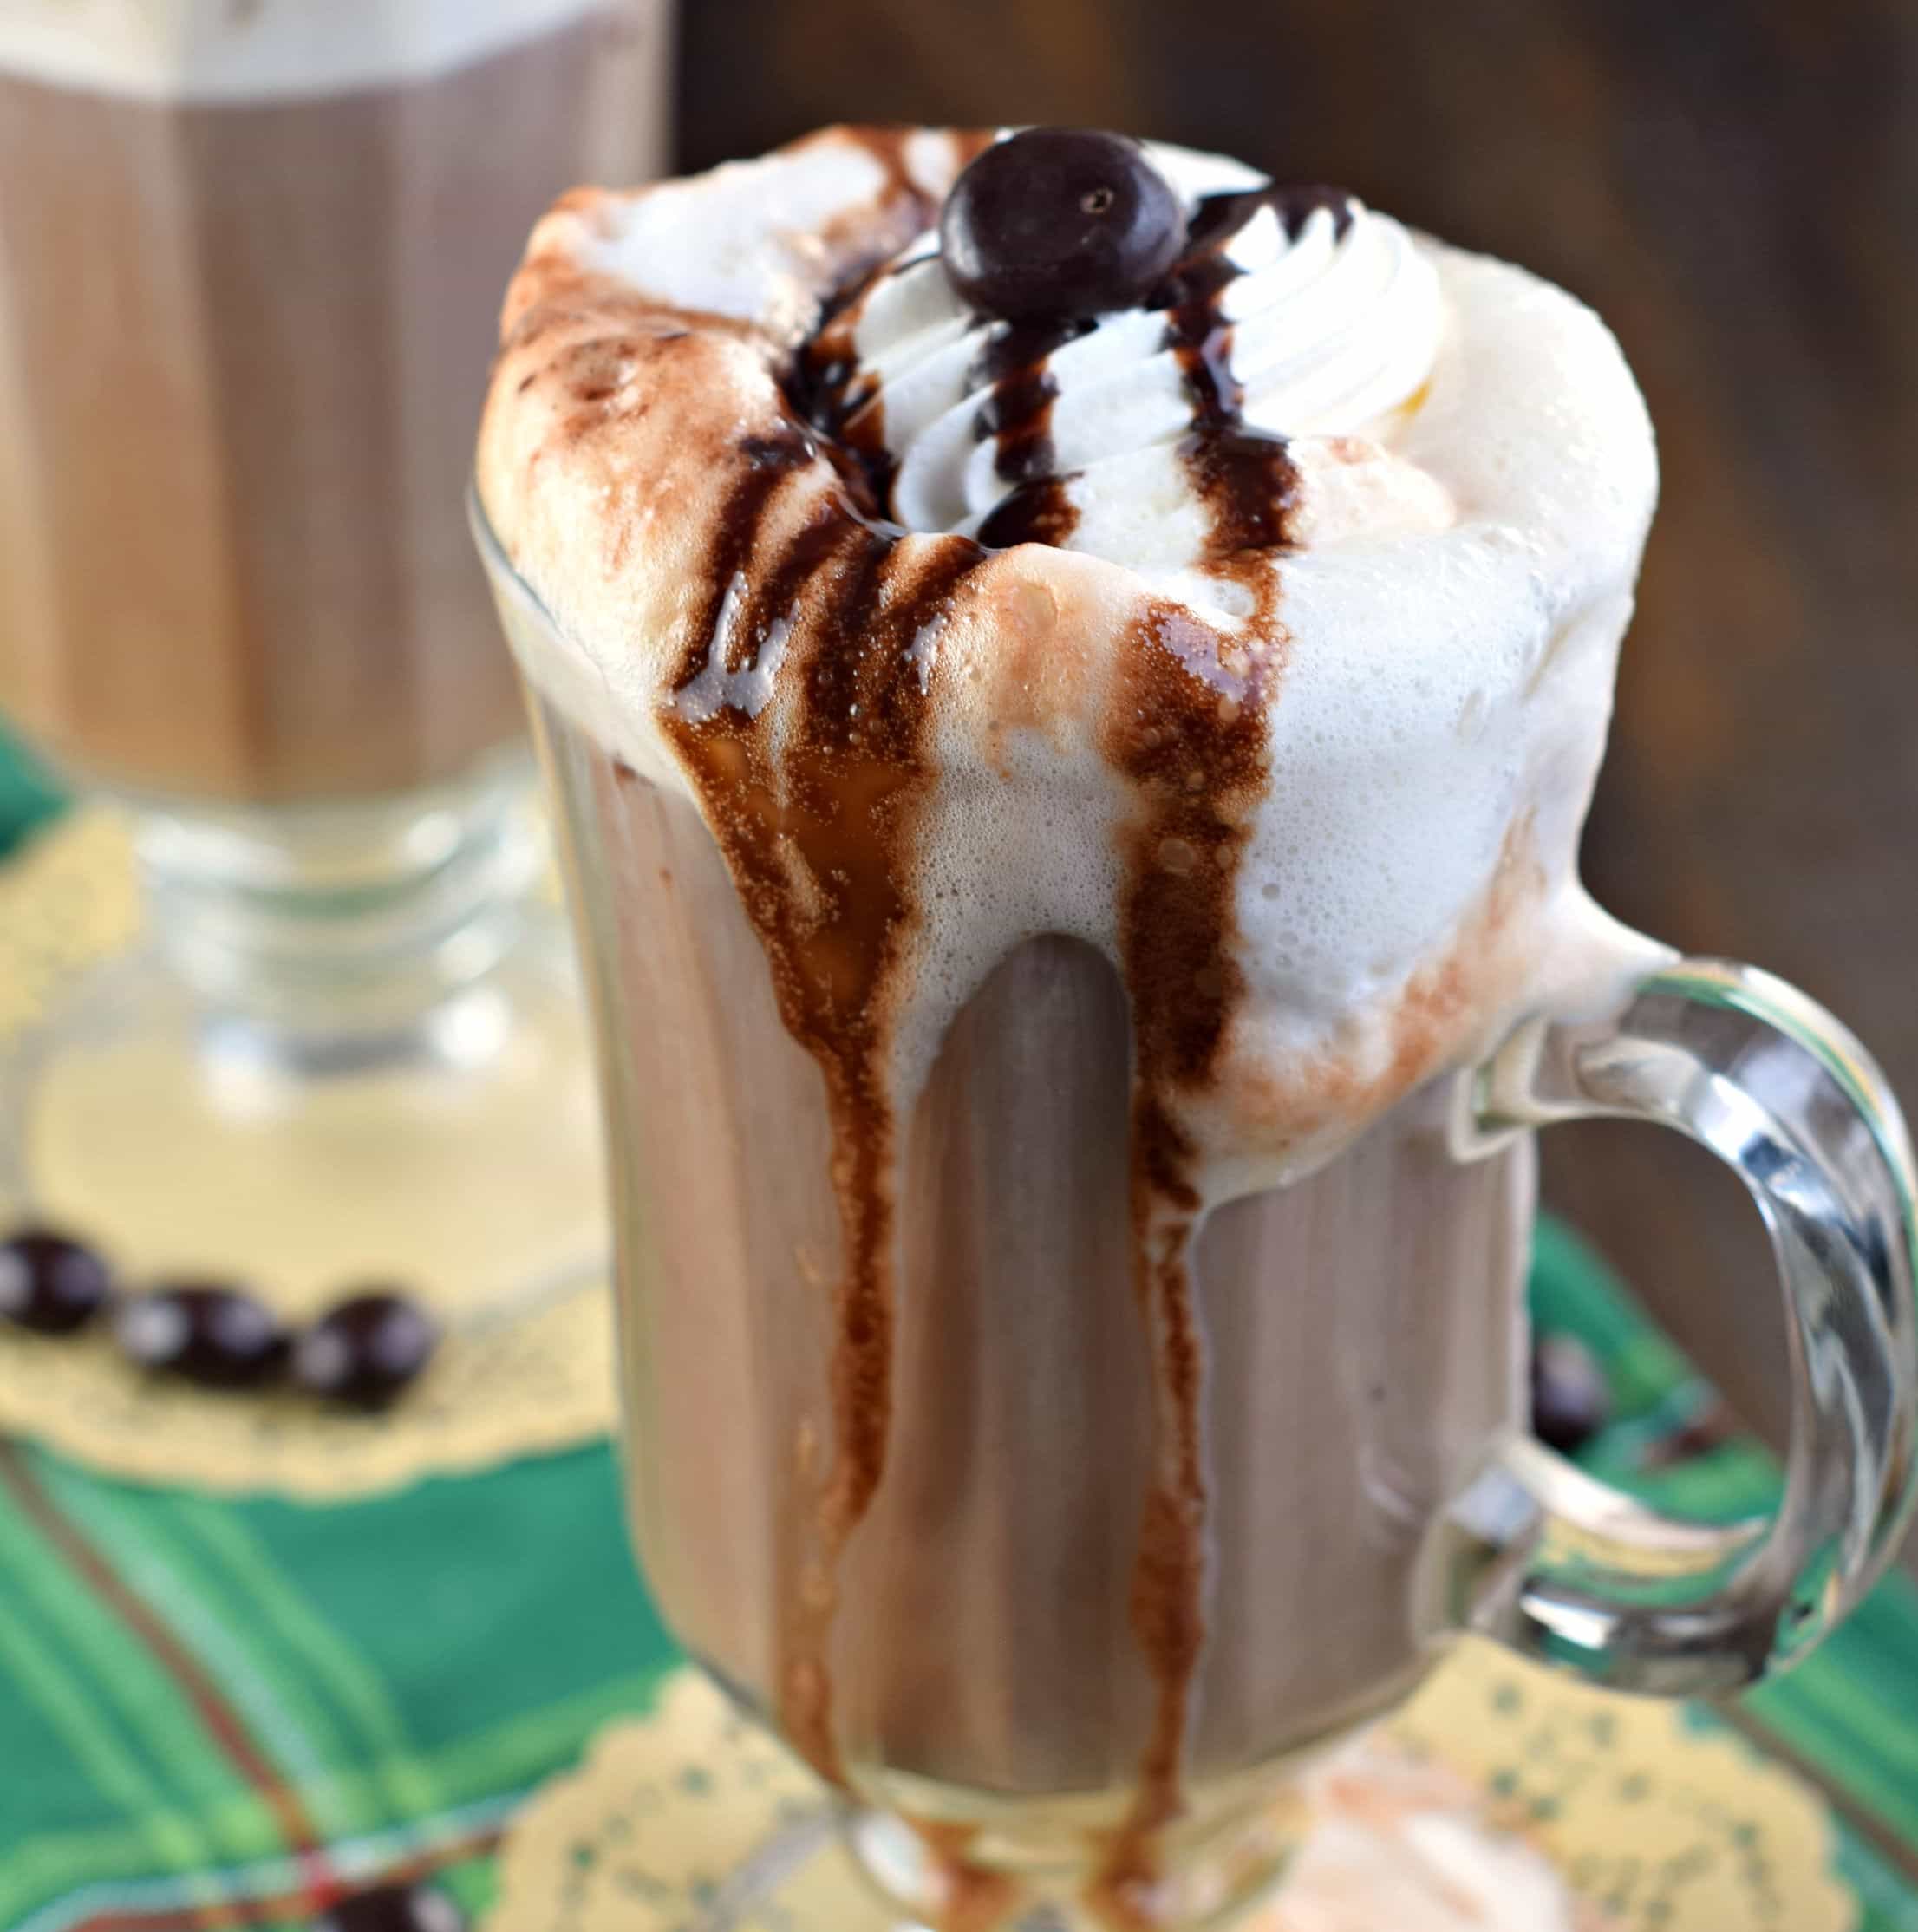 Hot mocha latte in a clear glass mug topped with whipped cream and chocolate sauce.